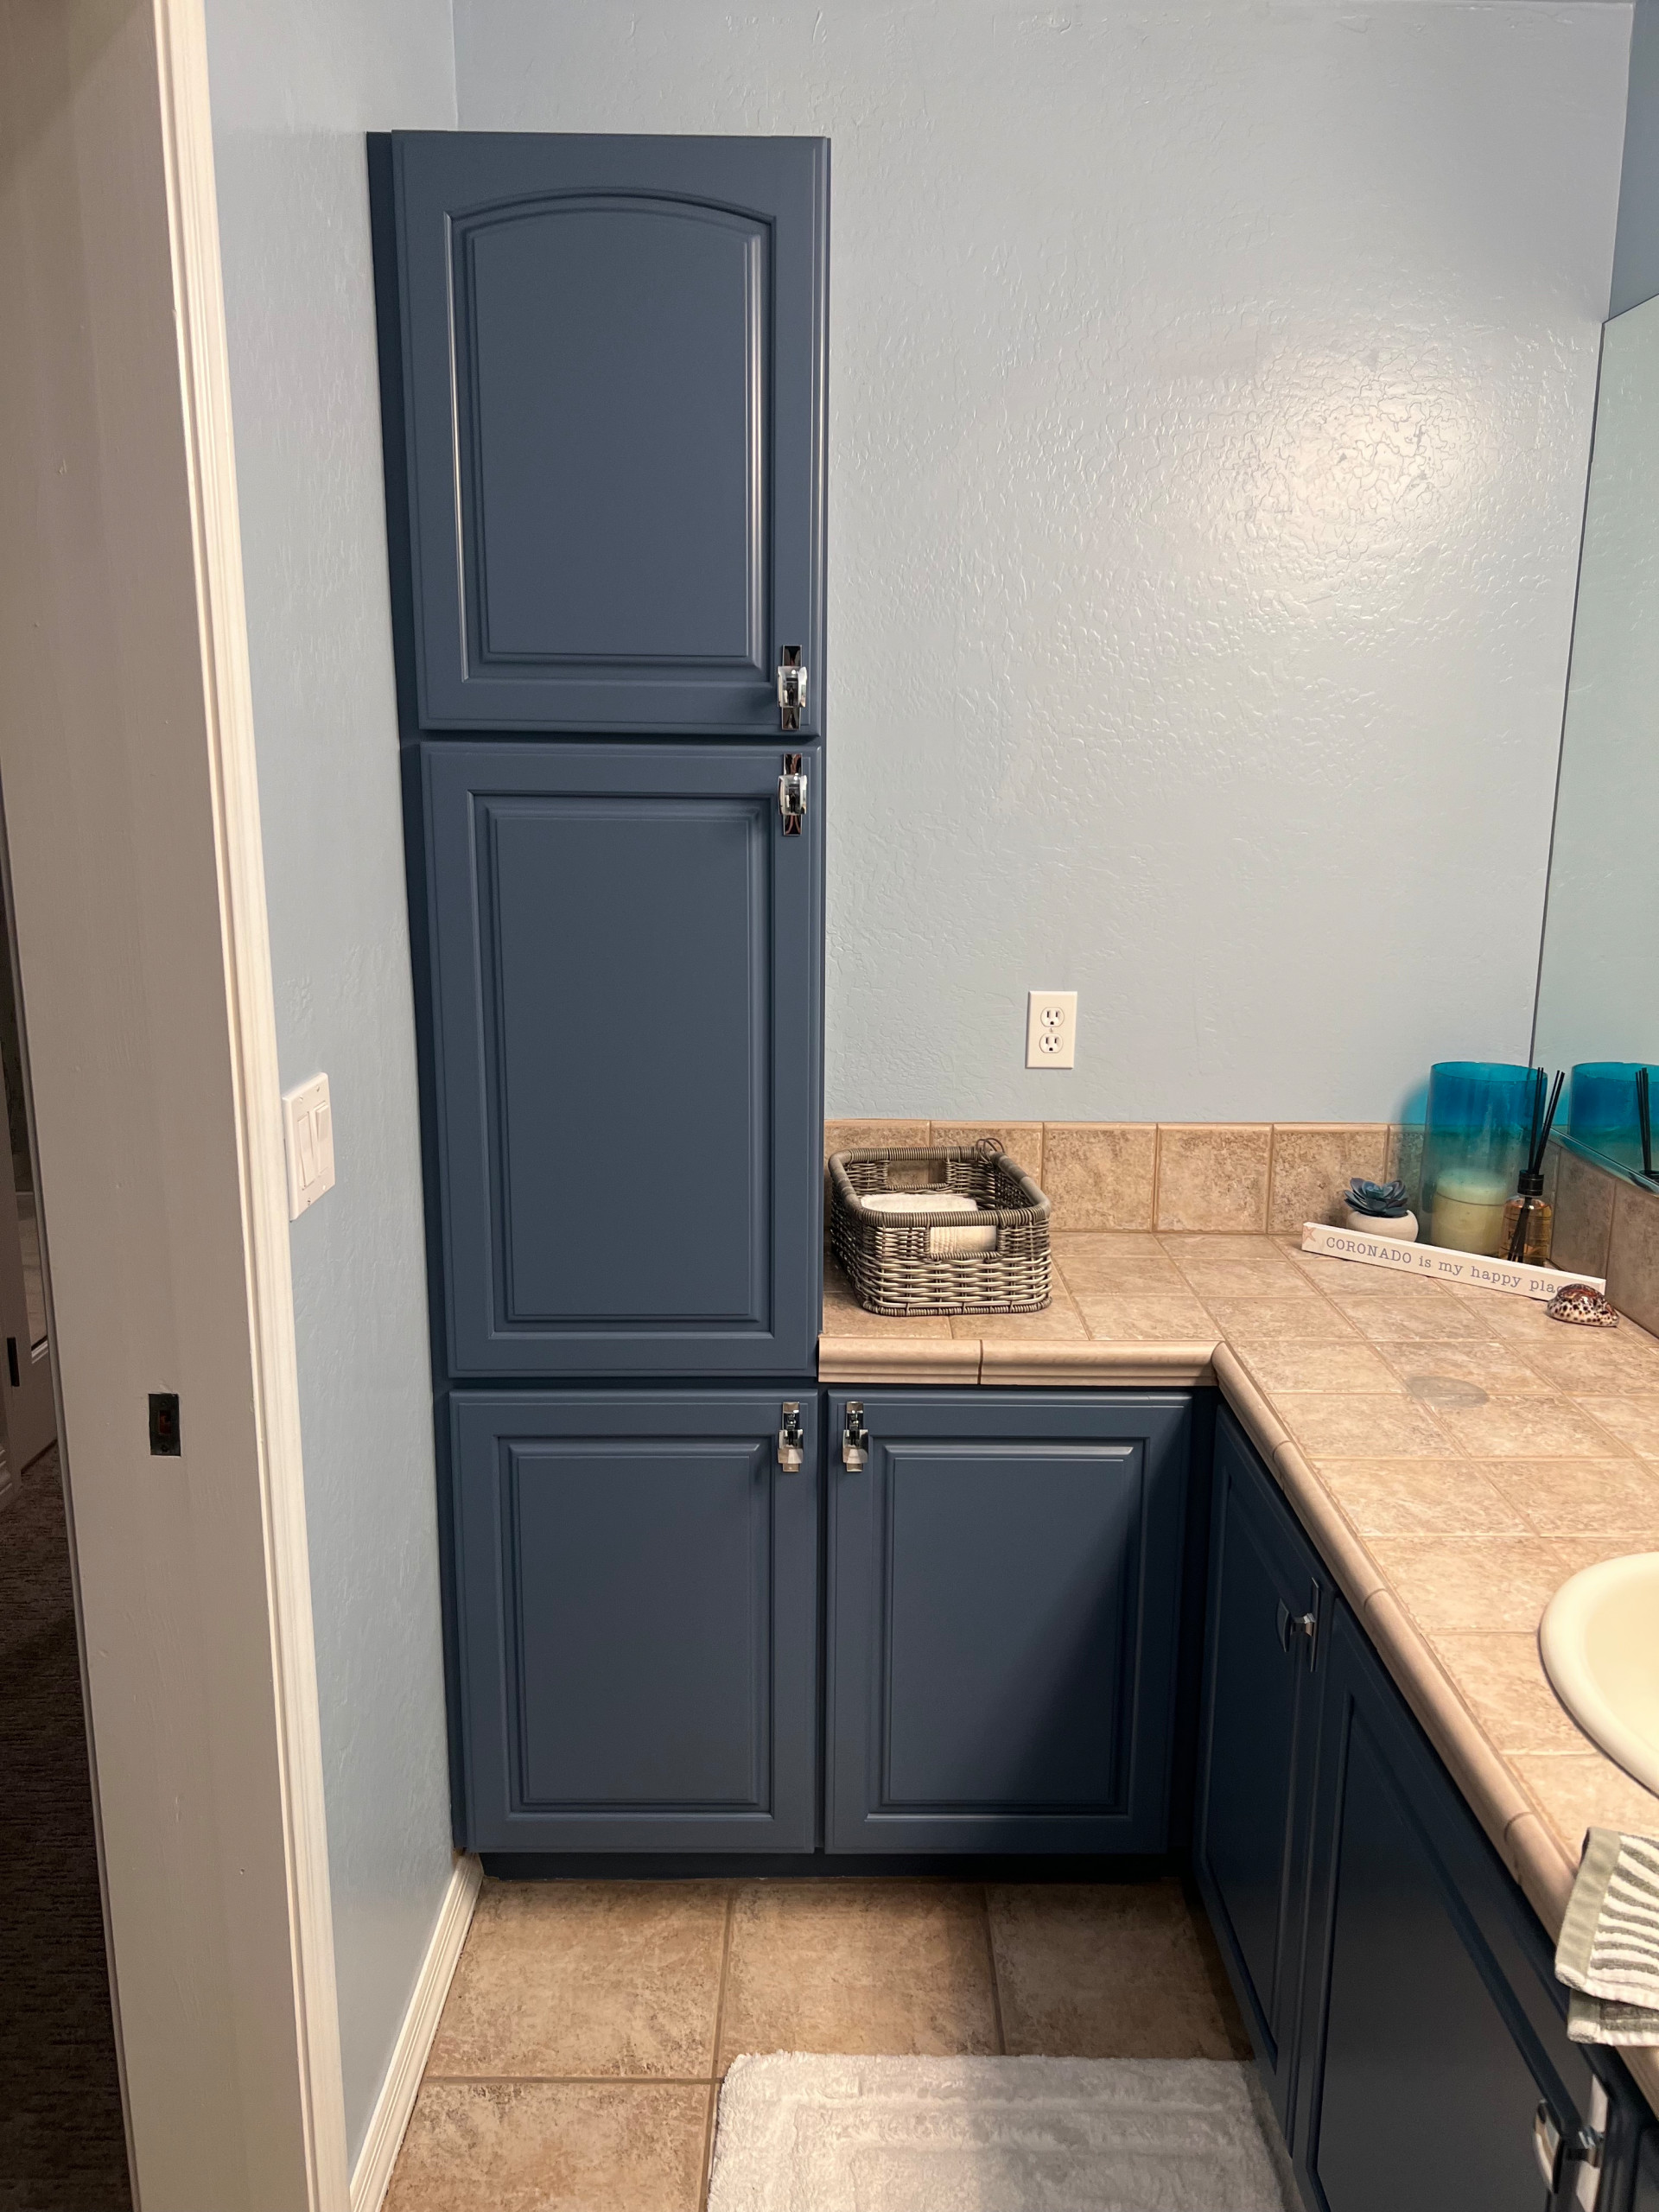 Painted Cabinetry In Multiple Bathrooms